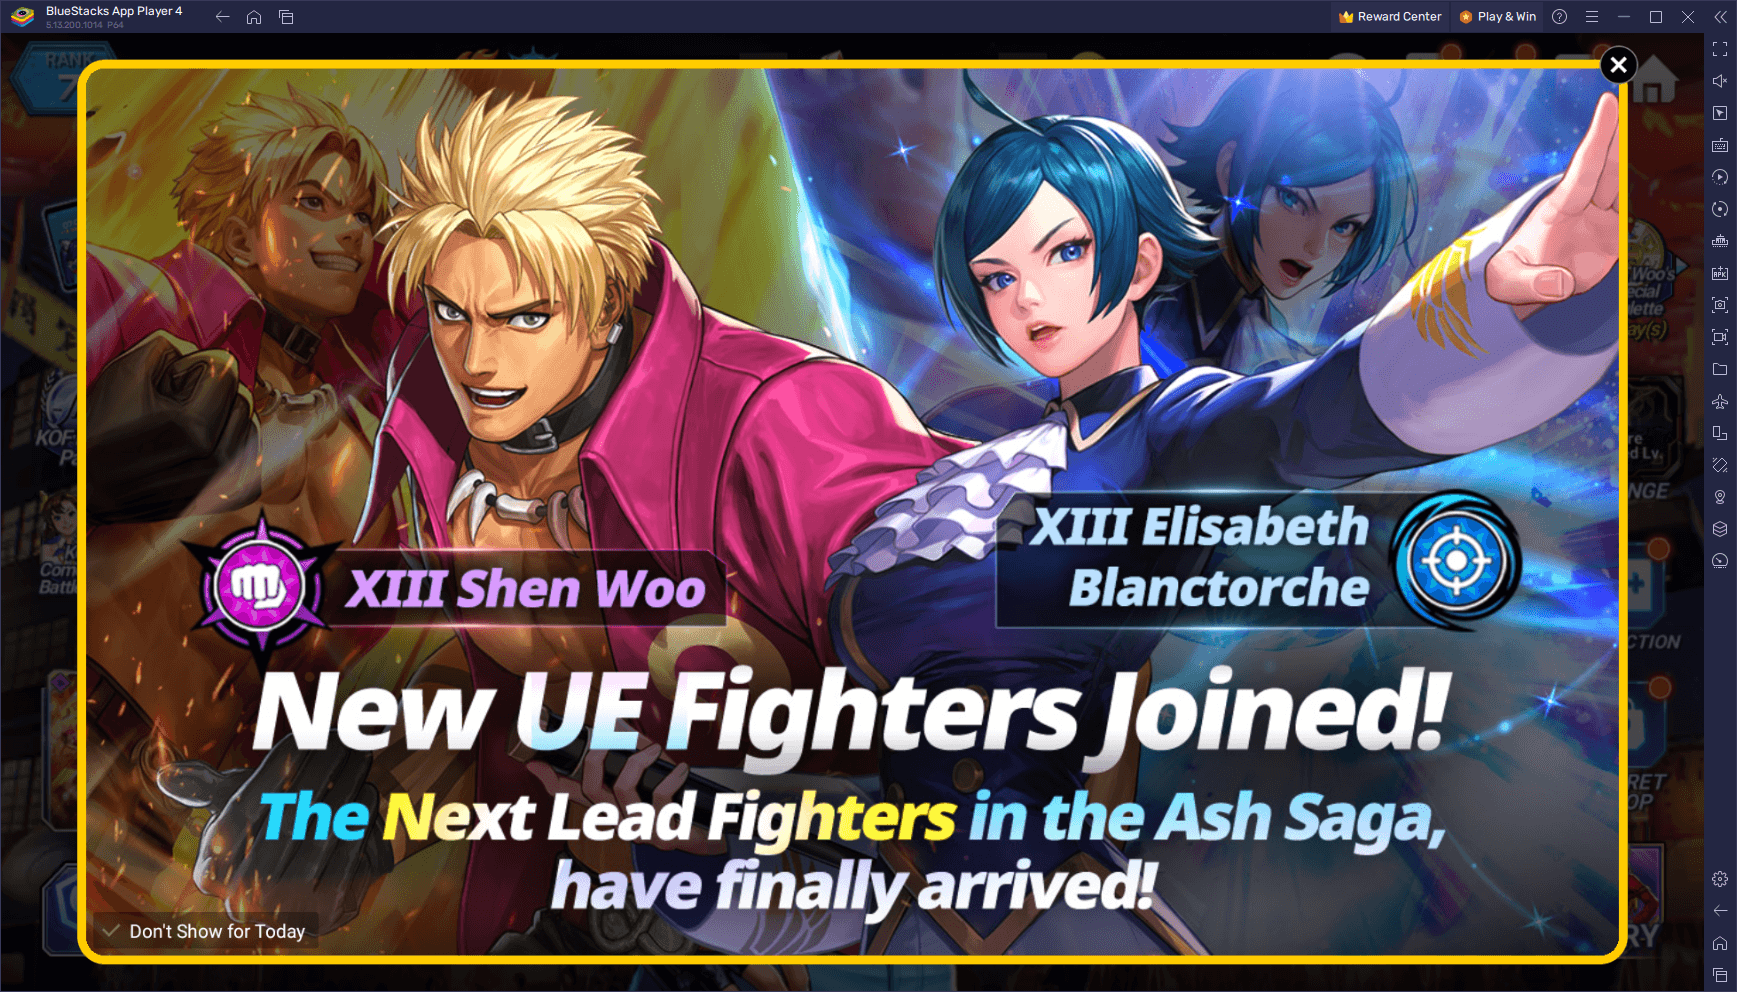 THE KING OF FIGHTERS ALLSTAR LAUNCHES A NEW COLLABORATION WITH